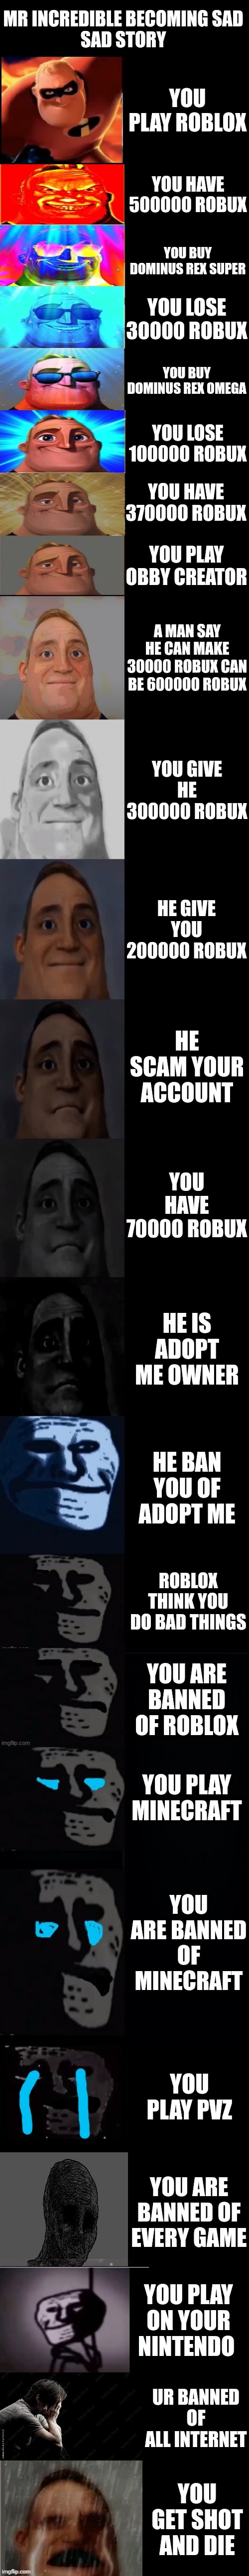 My recent experience with Roblox Support after losing roughly 30,000 Robux  : r/roblox